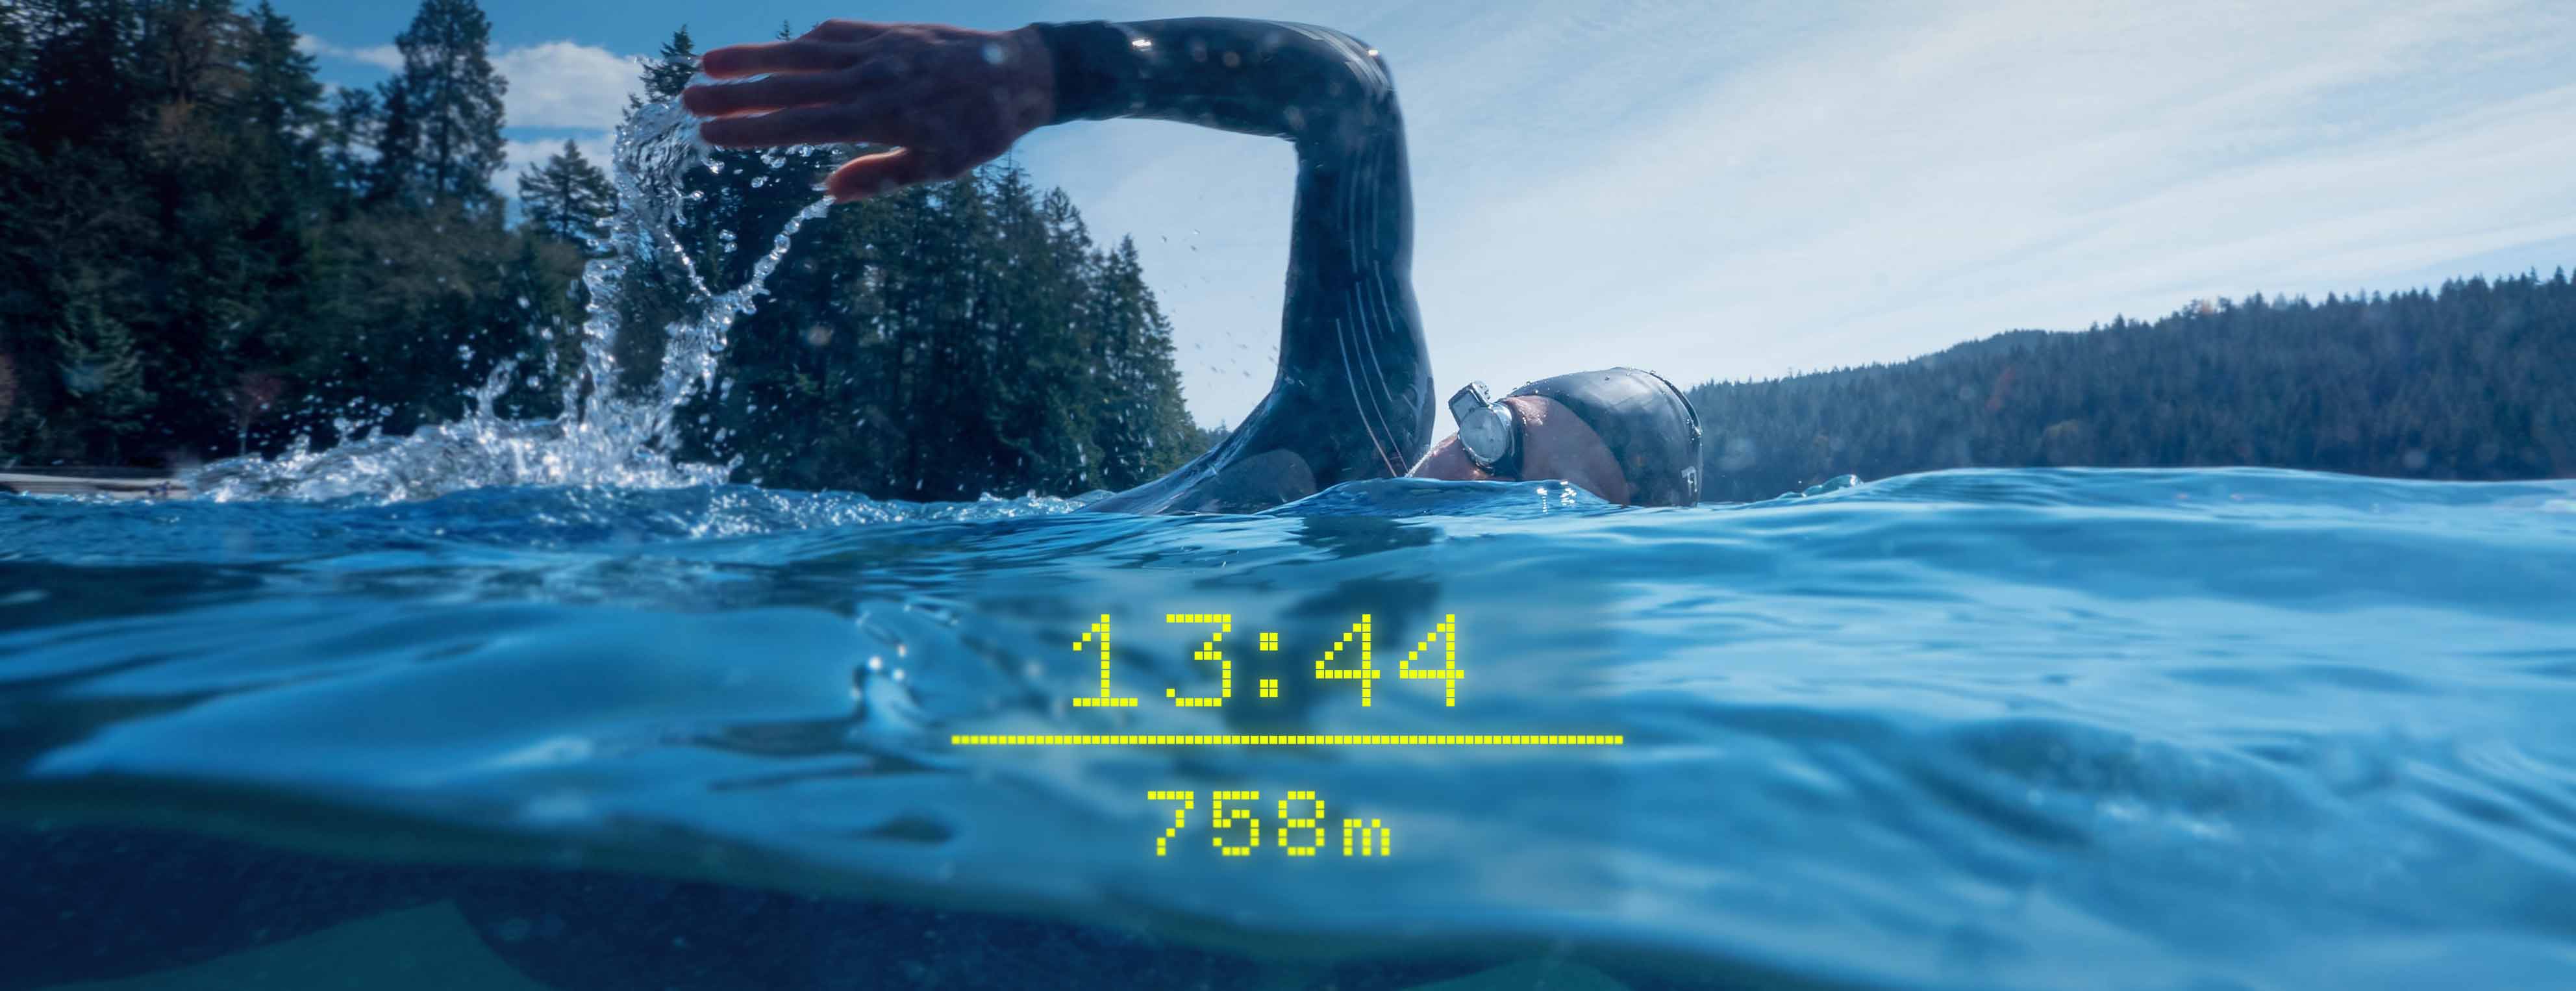 Hands-on: FORM Goggles Openwater Swim Mode Released for Apple